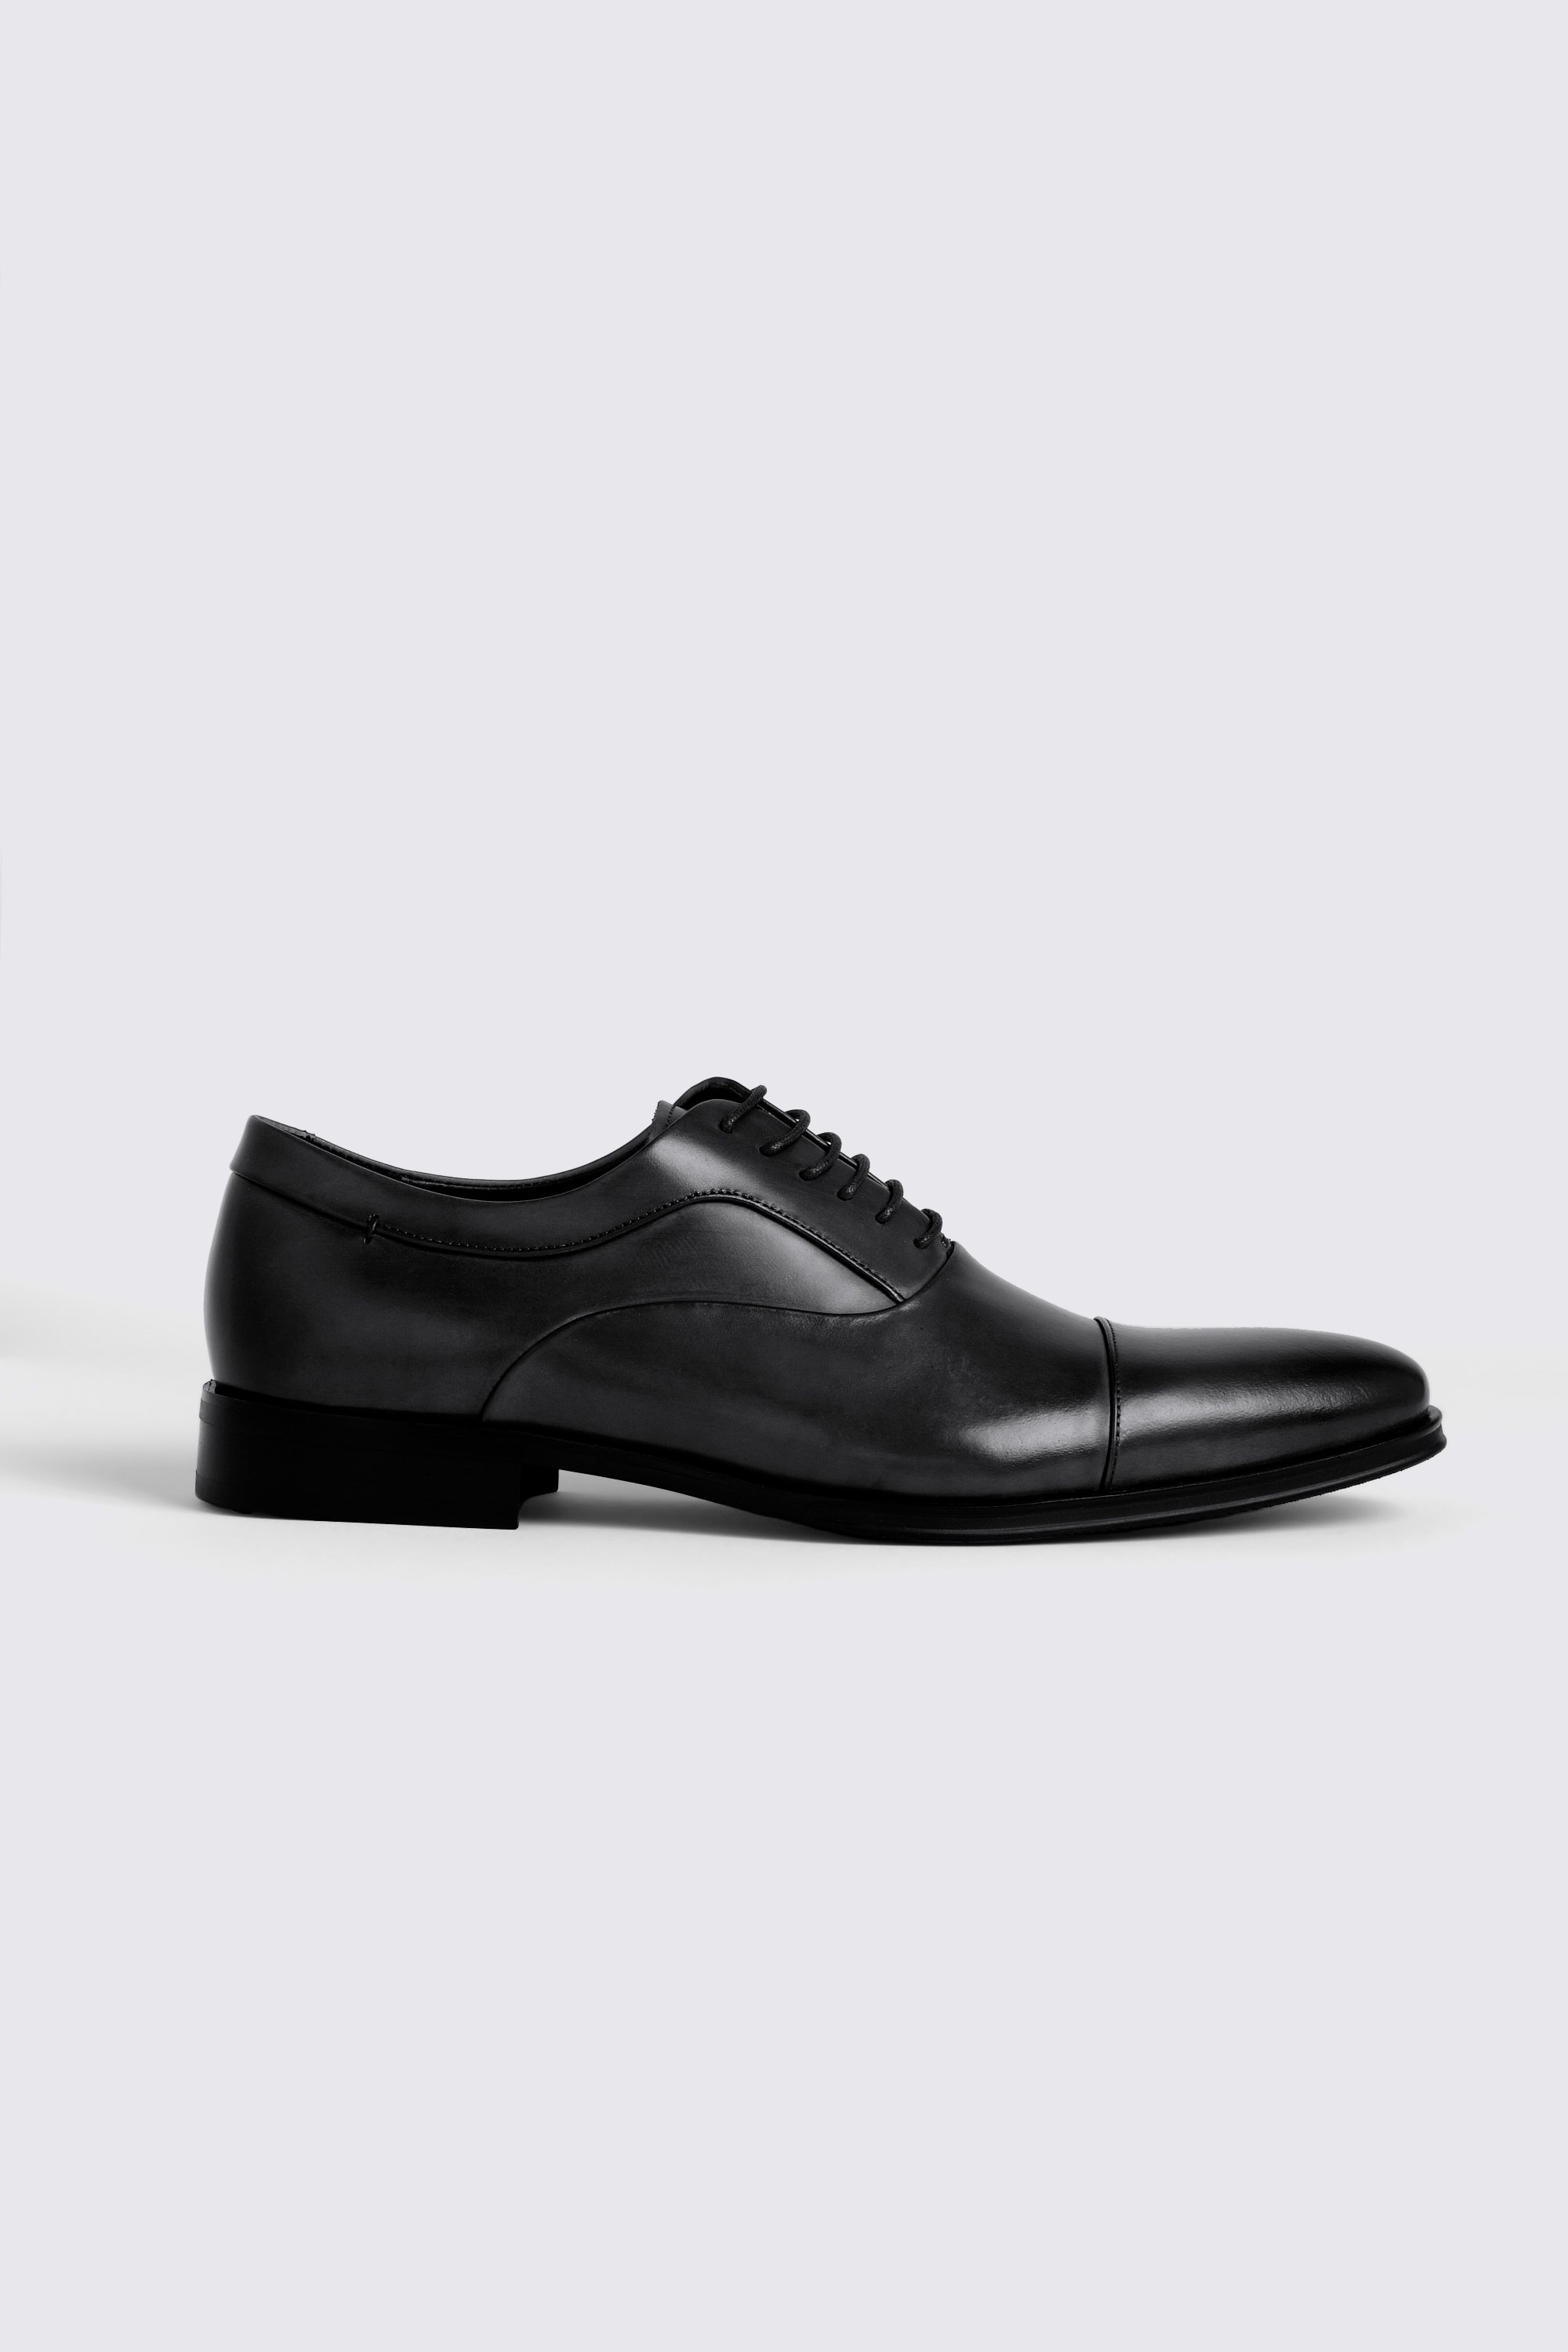 John White Guildhall Black Oxford Shoes | Buy Online at Moss